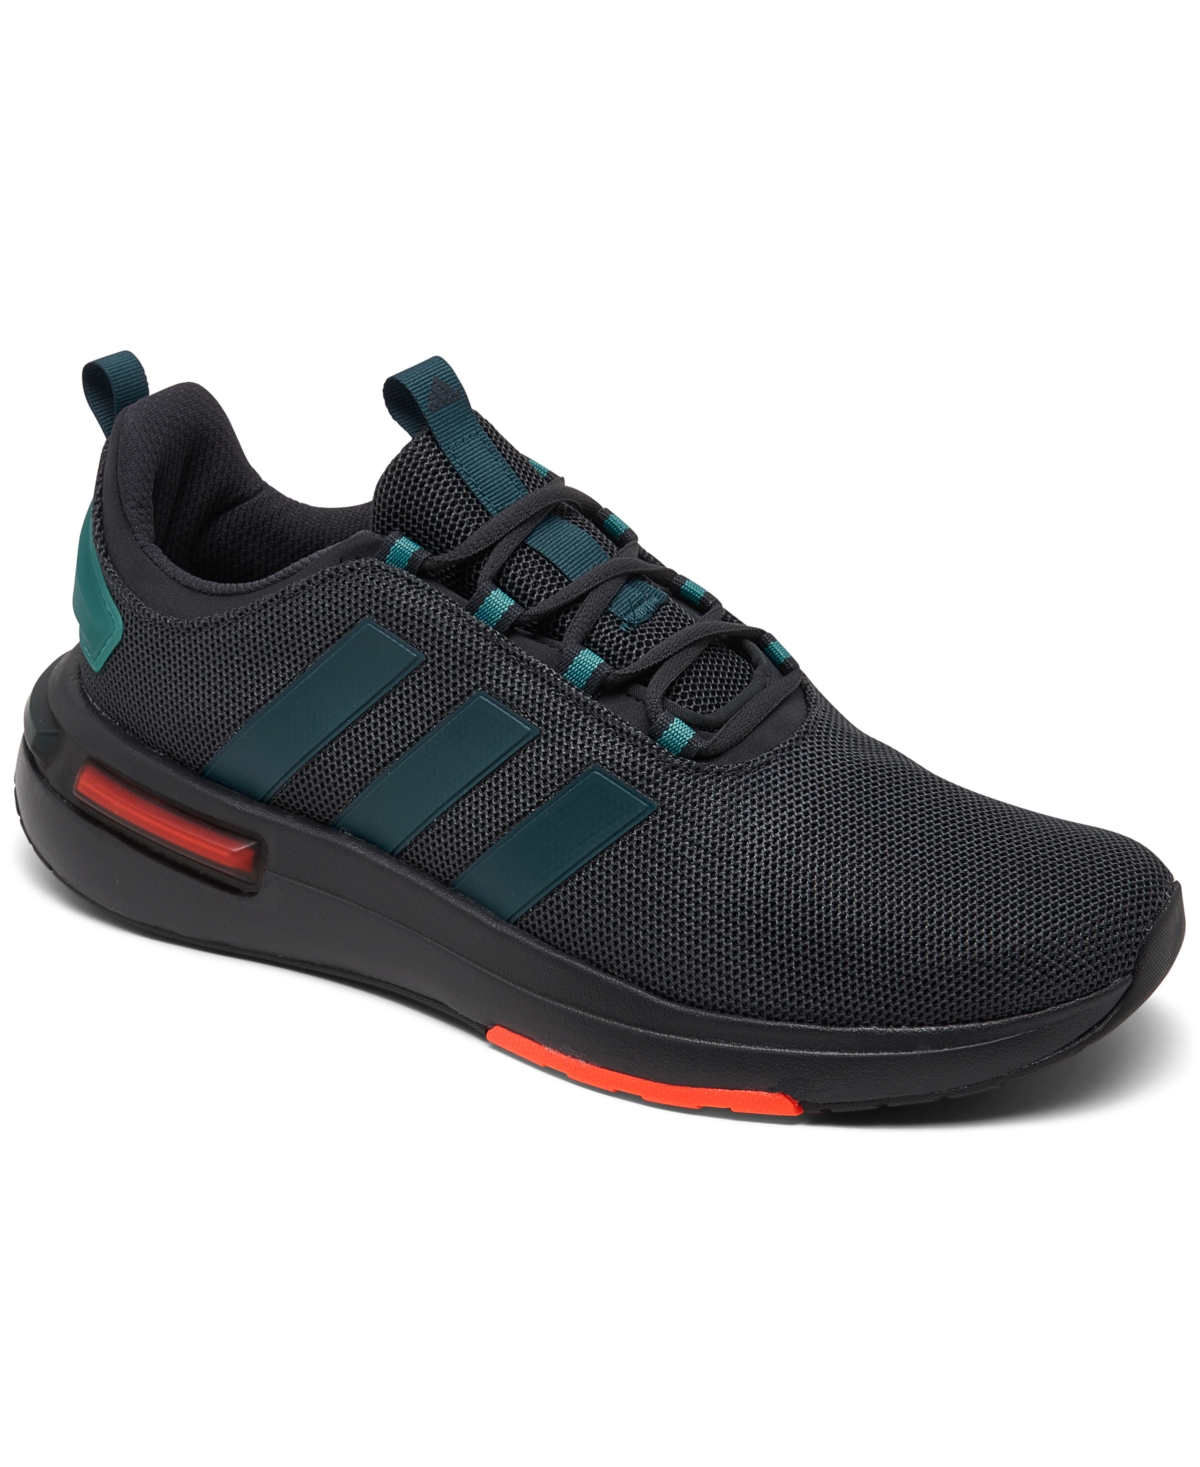 Adidas Originals Men's Racer Tr23 Casual Running Sneakers From Finish Line In Carbon,night,red